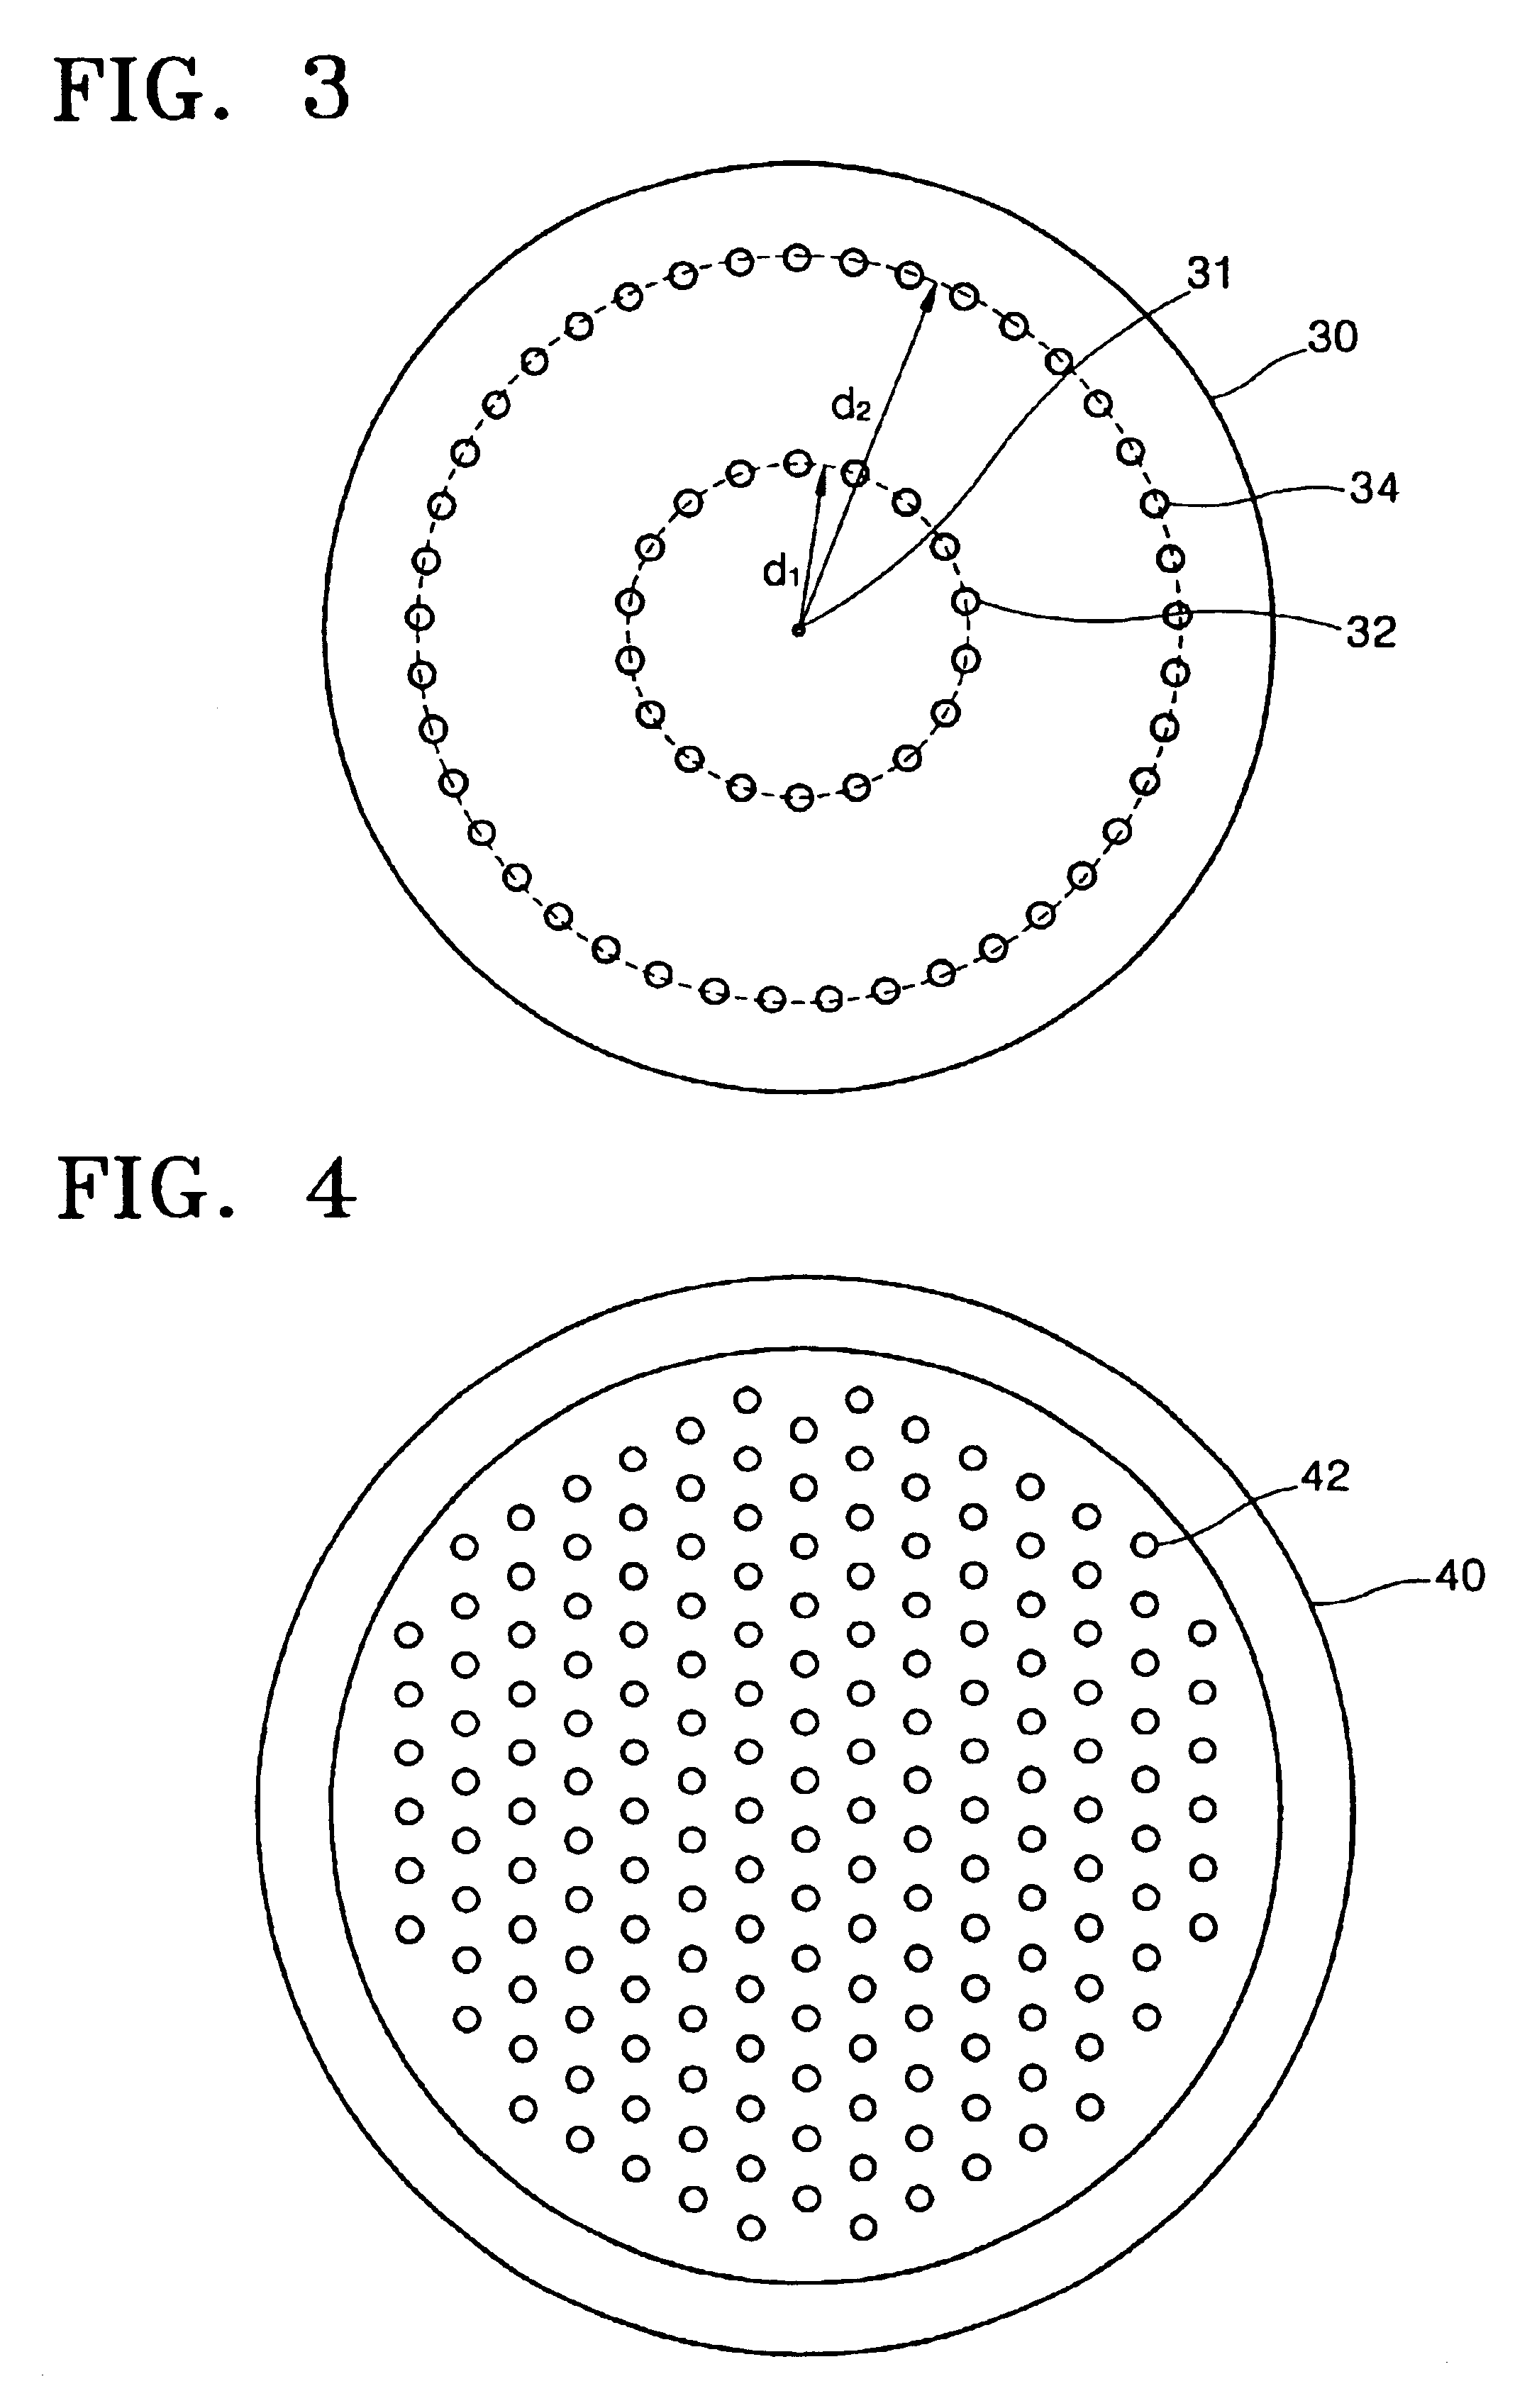 Shower head of a wafer treatment apparatus having a gap controller